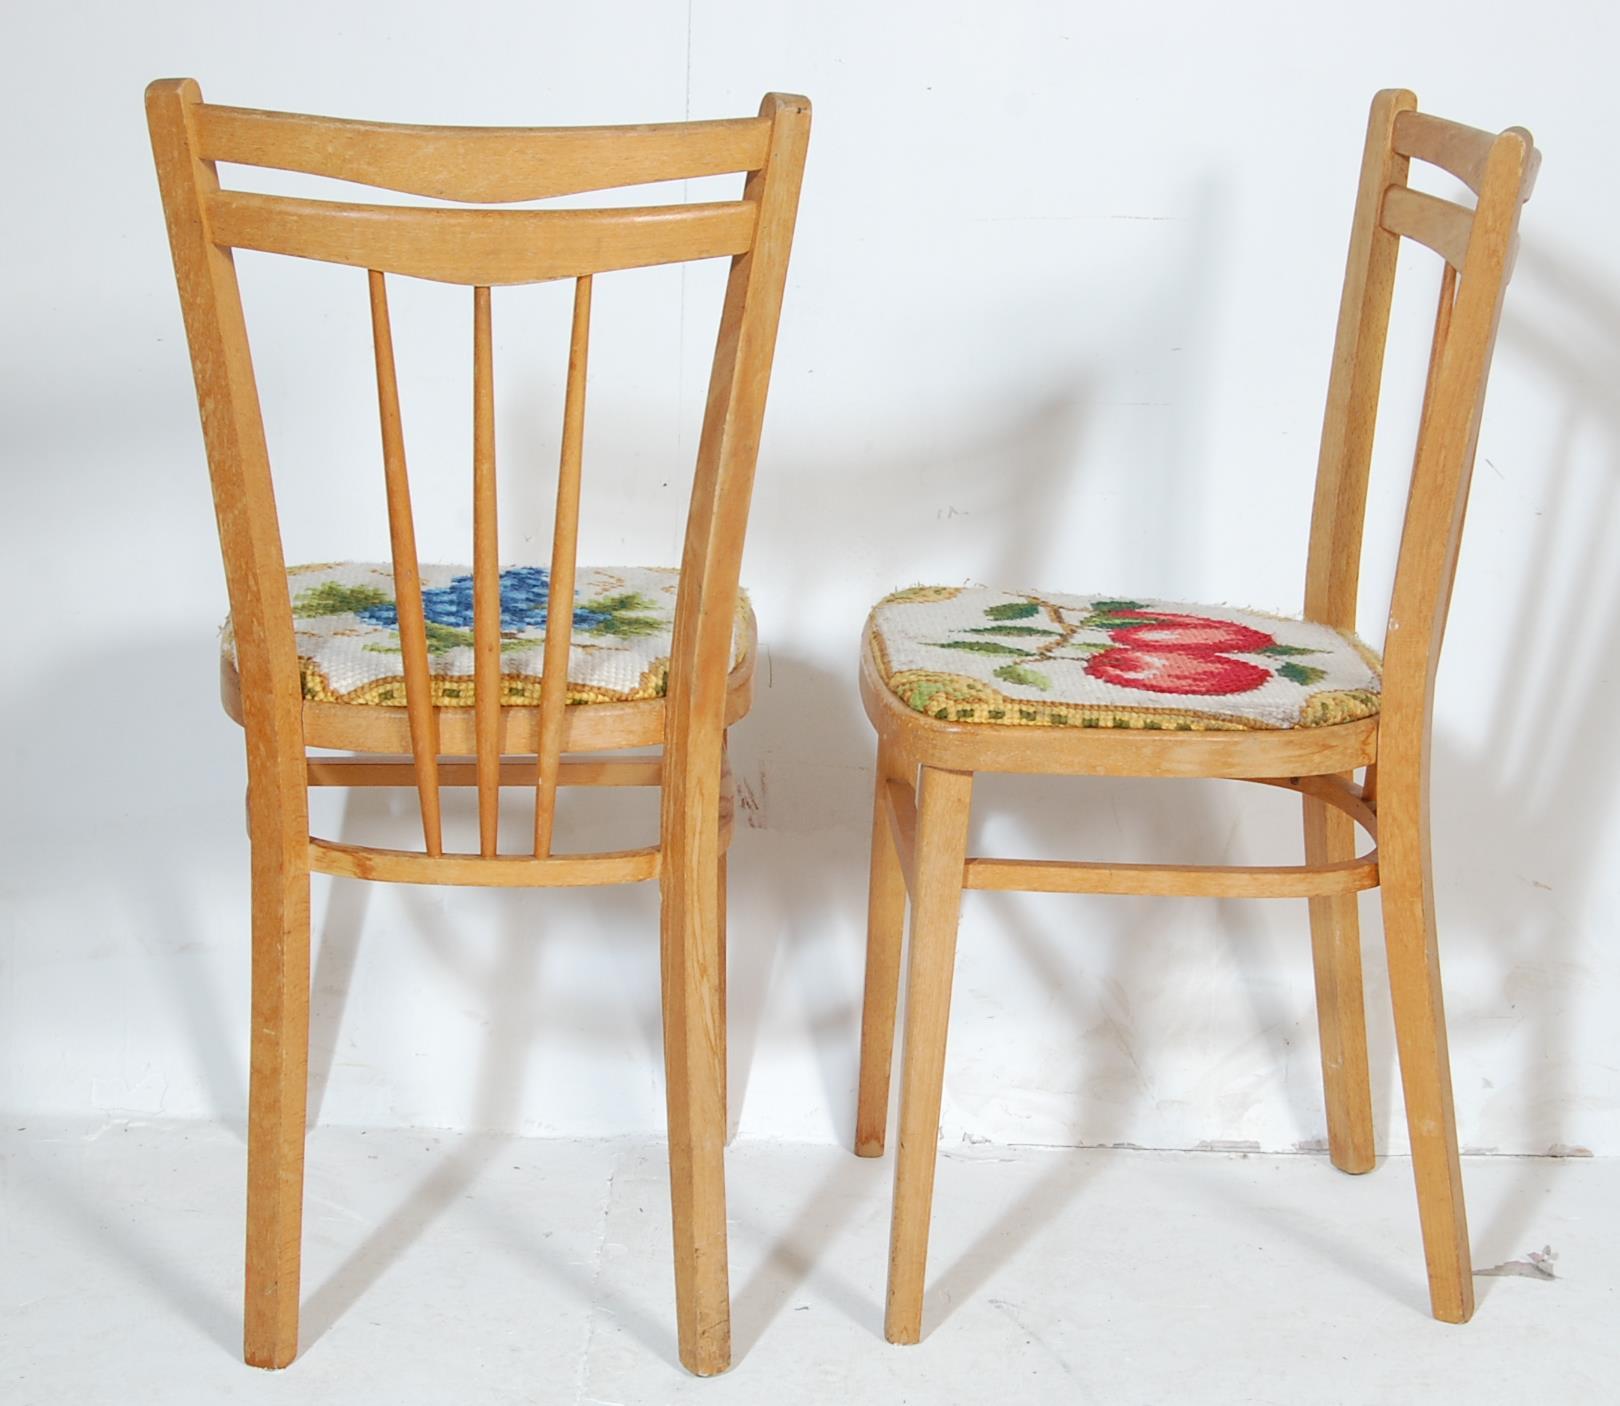 FIVE RETRO 20TH CENTURY DINING CHAIRS / KITCHEN CHAIRS - Image 5 of 5